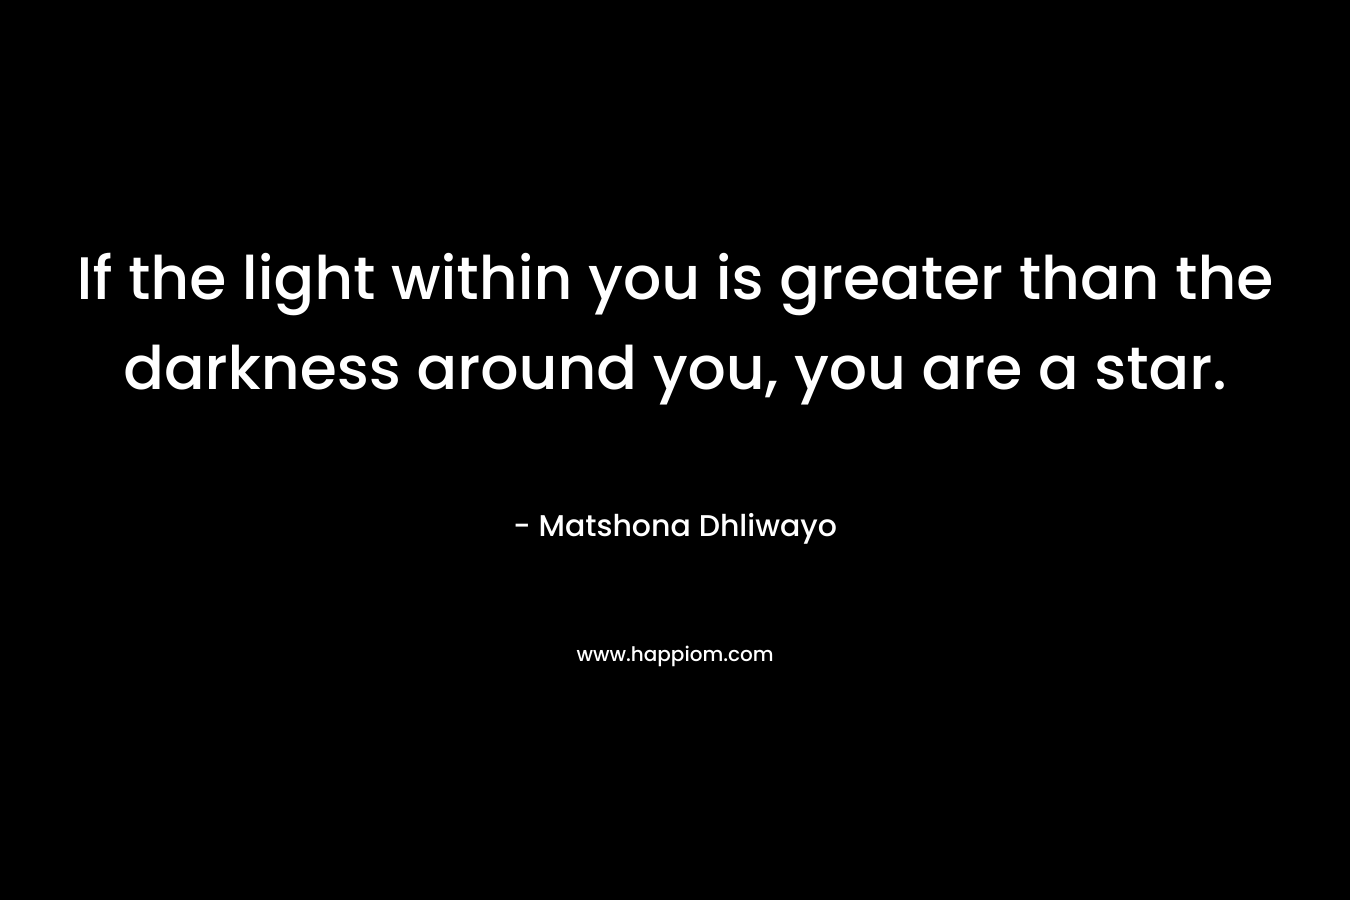 If the light within you is greater than the darkness around you, you are a star.